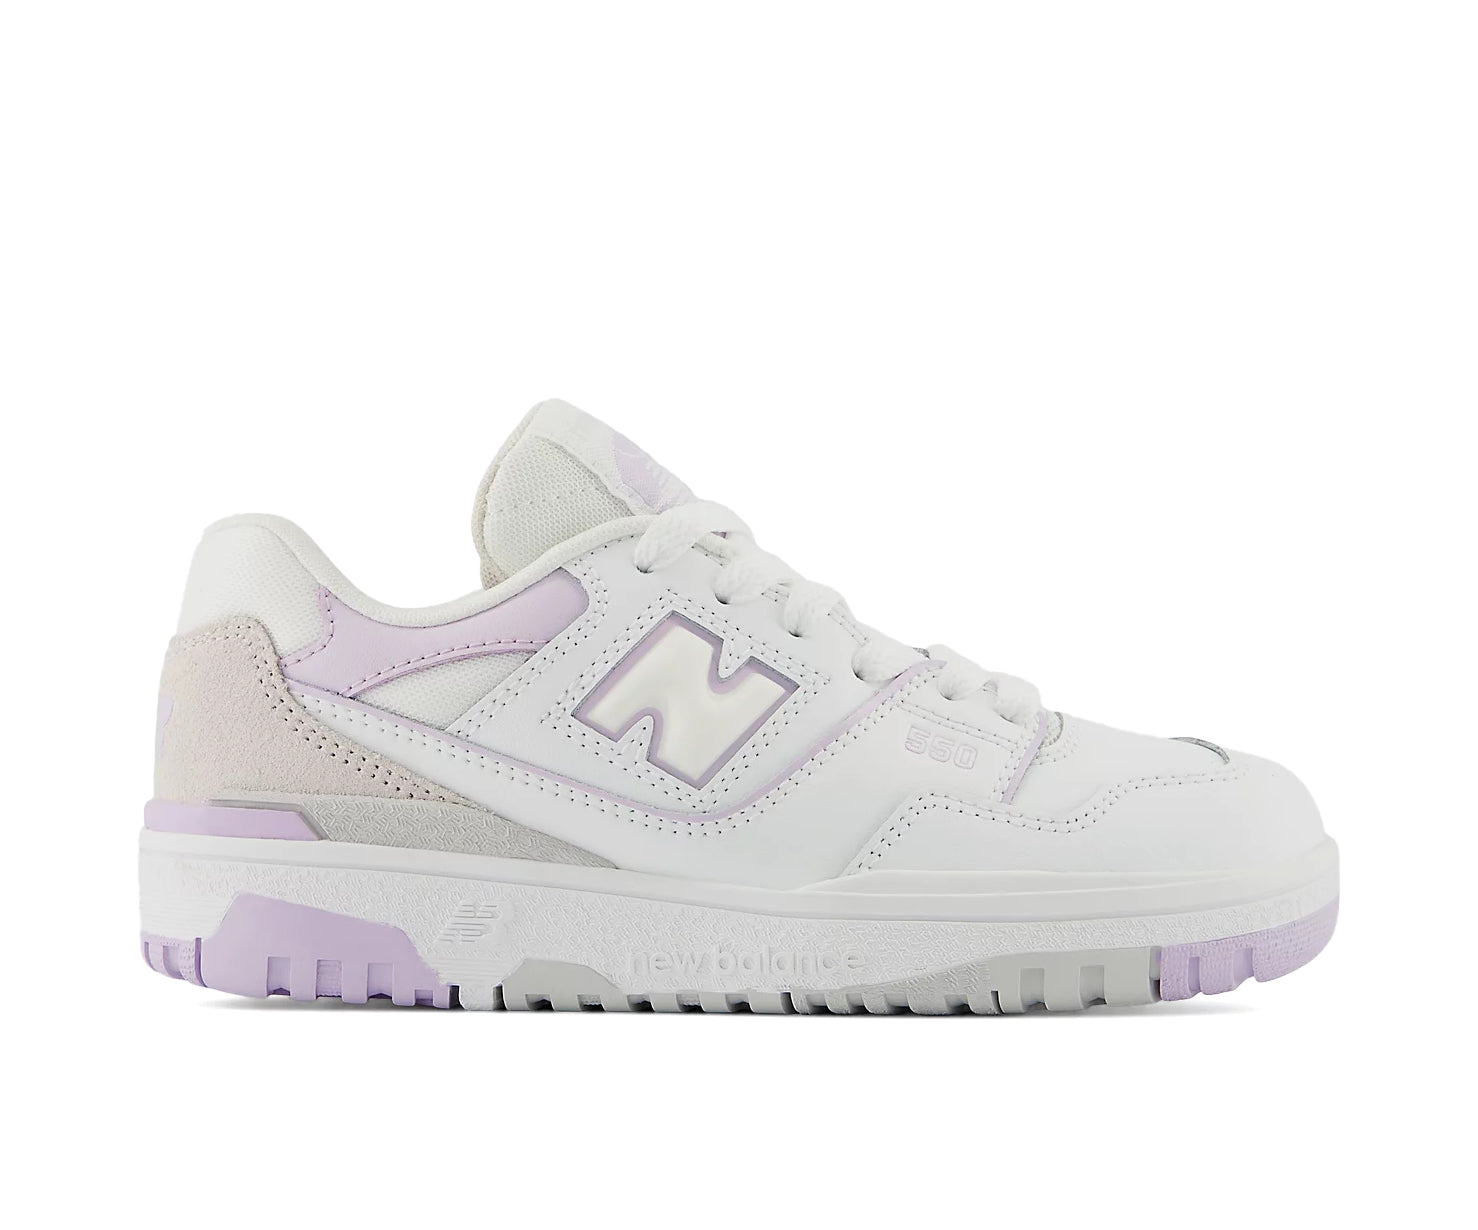 A white and lilac leather shoe